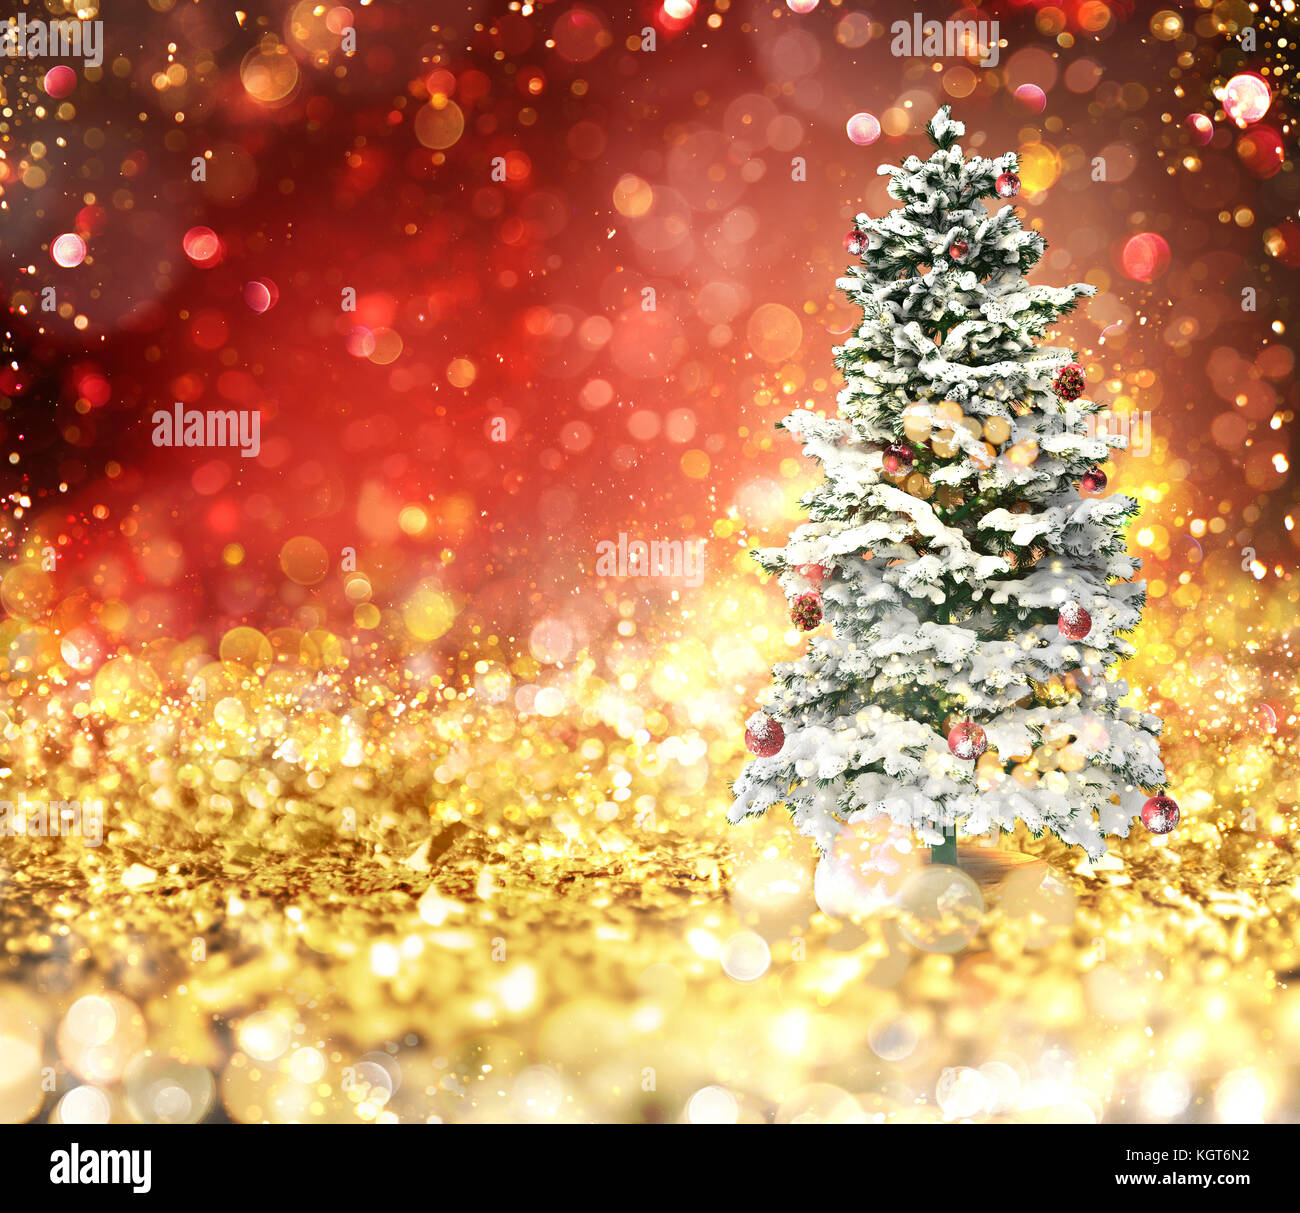 Christmas tree on a gold and red sparkly background Stock Photo